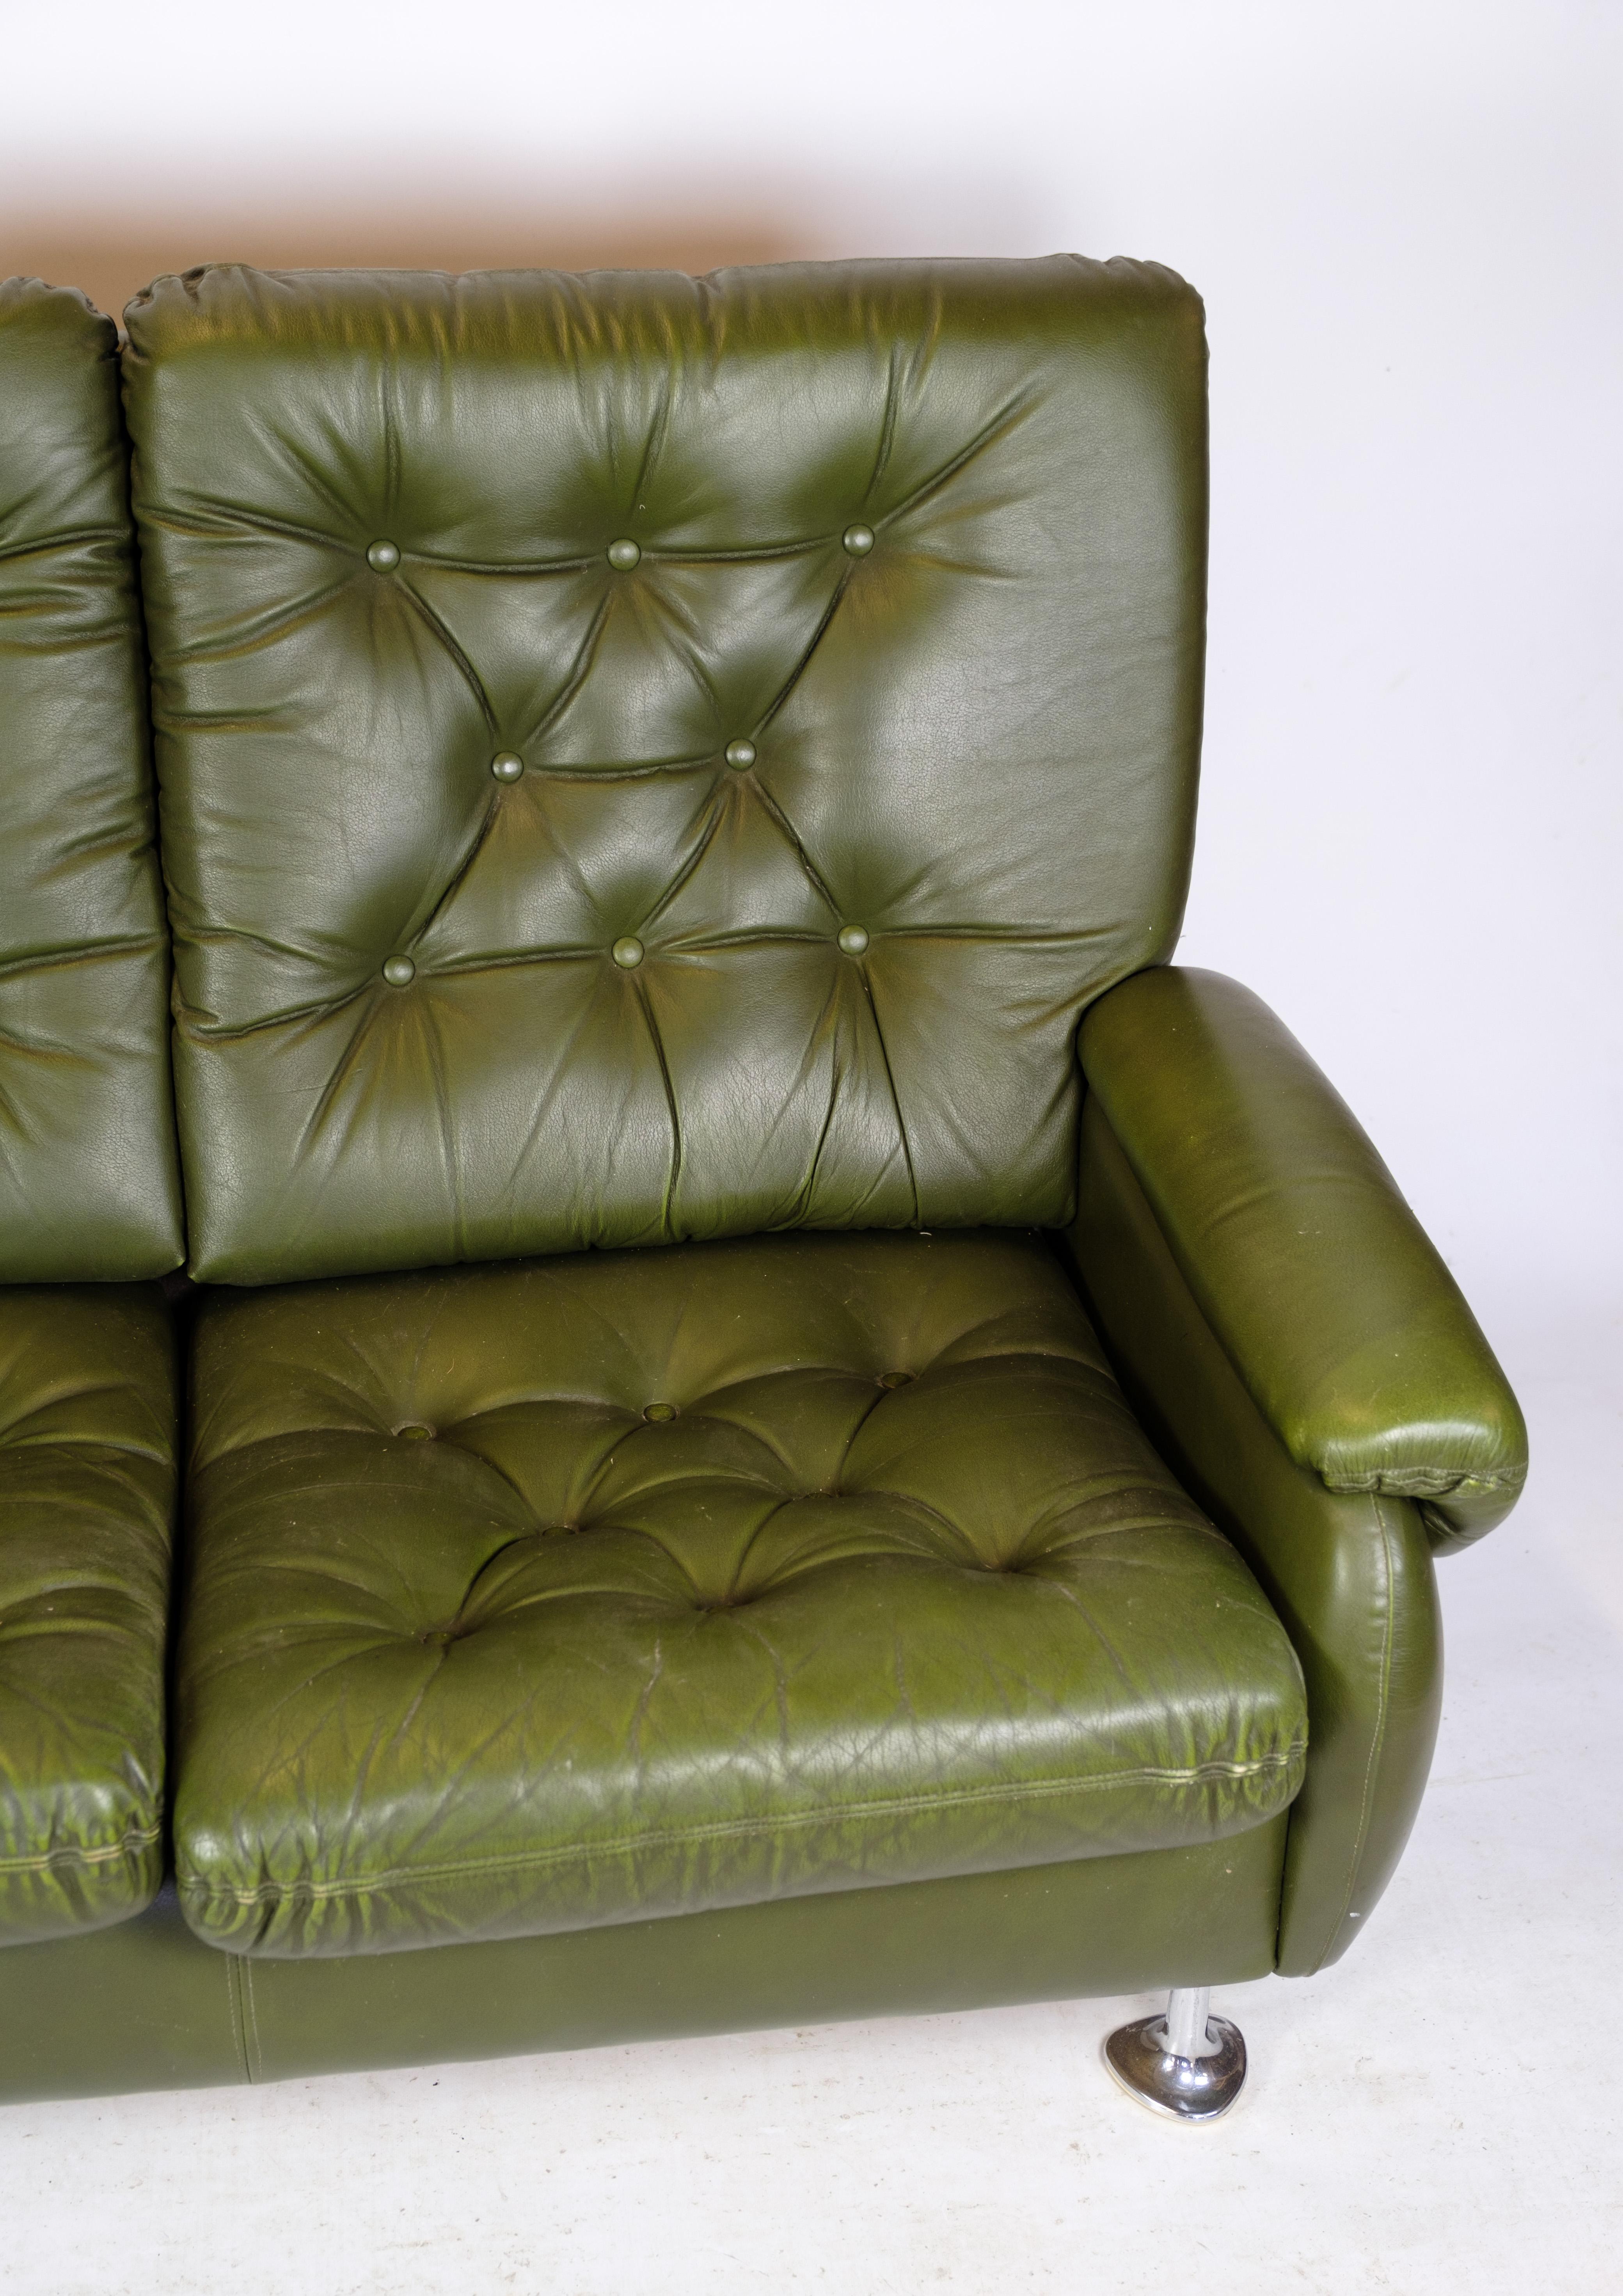 3-person sofa in dark green leather and chrome legs from the early 1970s.
Measurements in cm: H:90 W:195 D:65 SH:40